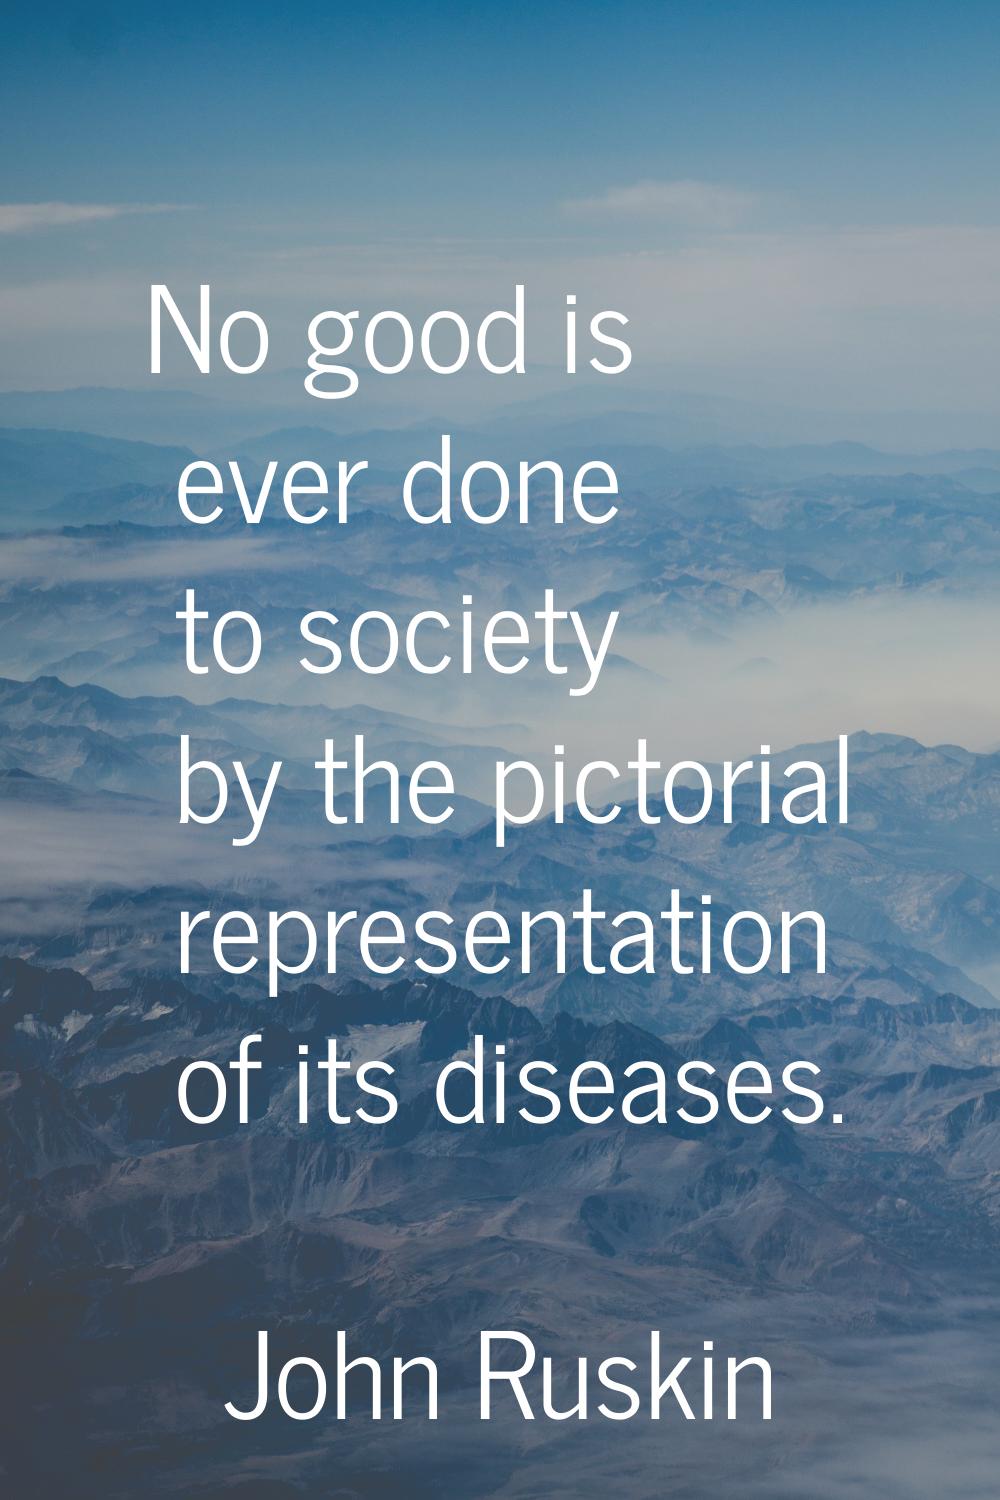 No good is ever done to society by the pictorial representation of its diseases.